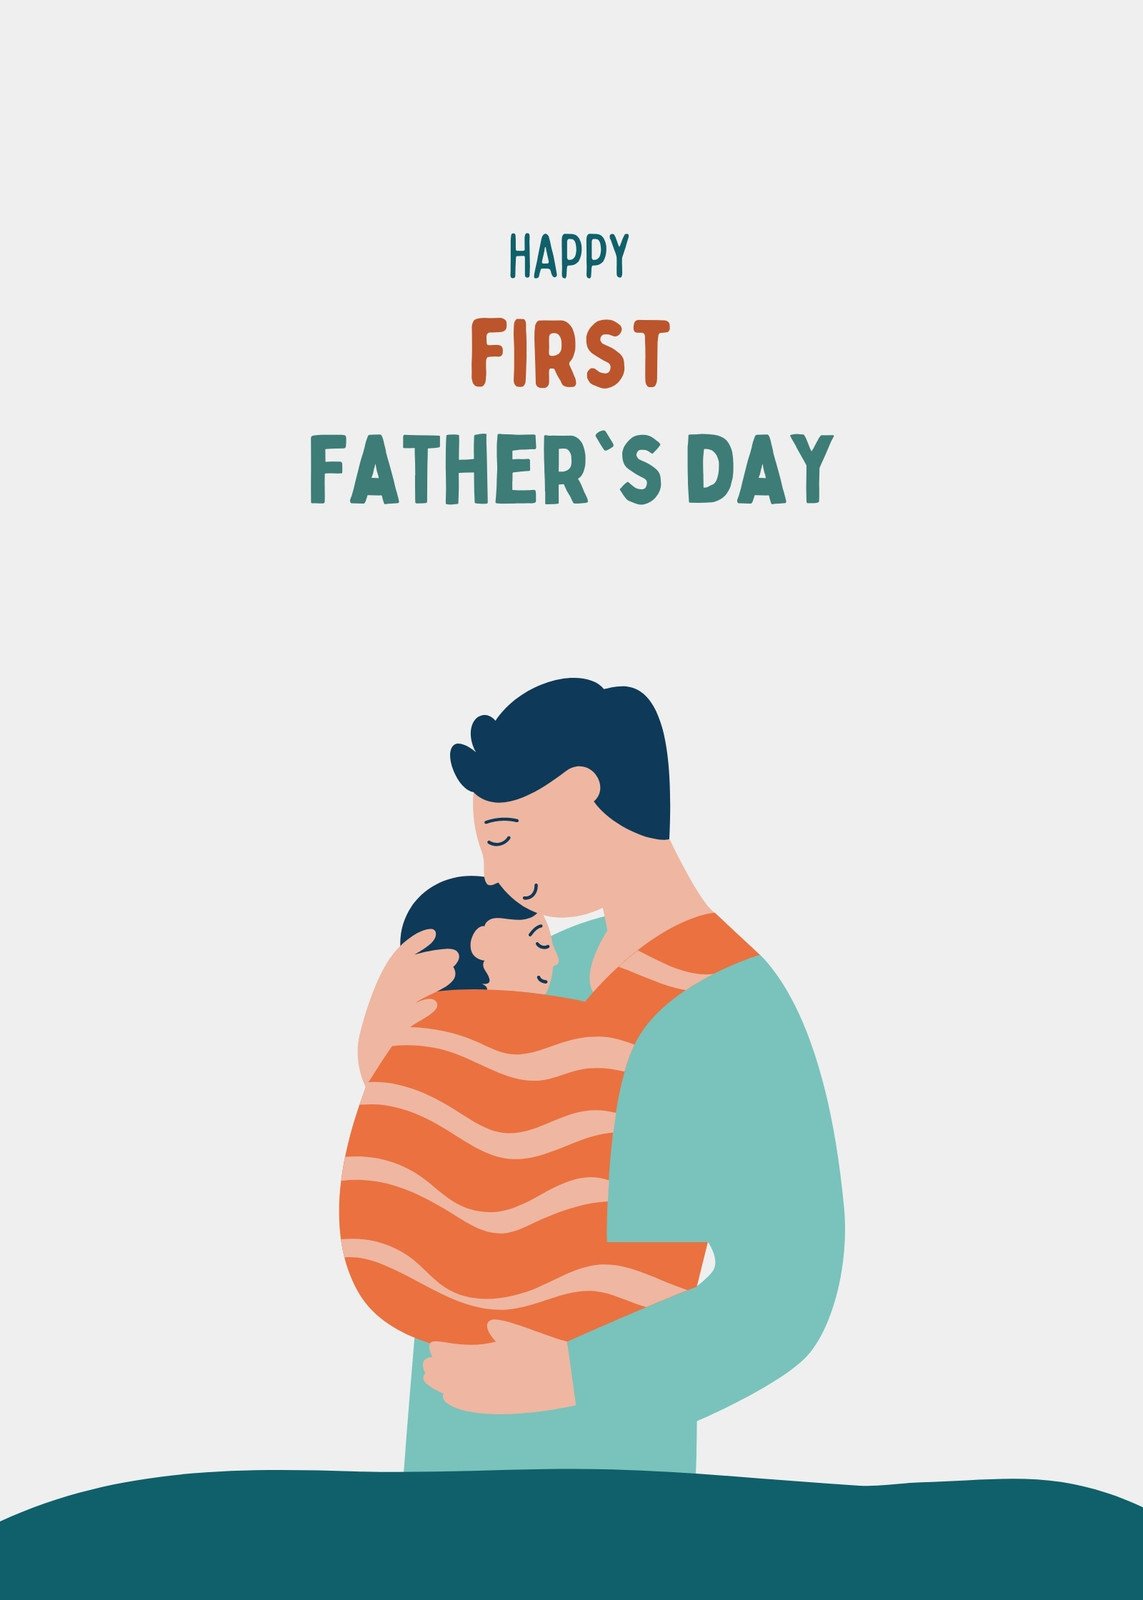 Free, printable Father's Day card templates to personalize | Canva